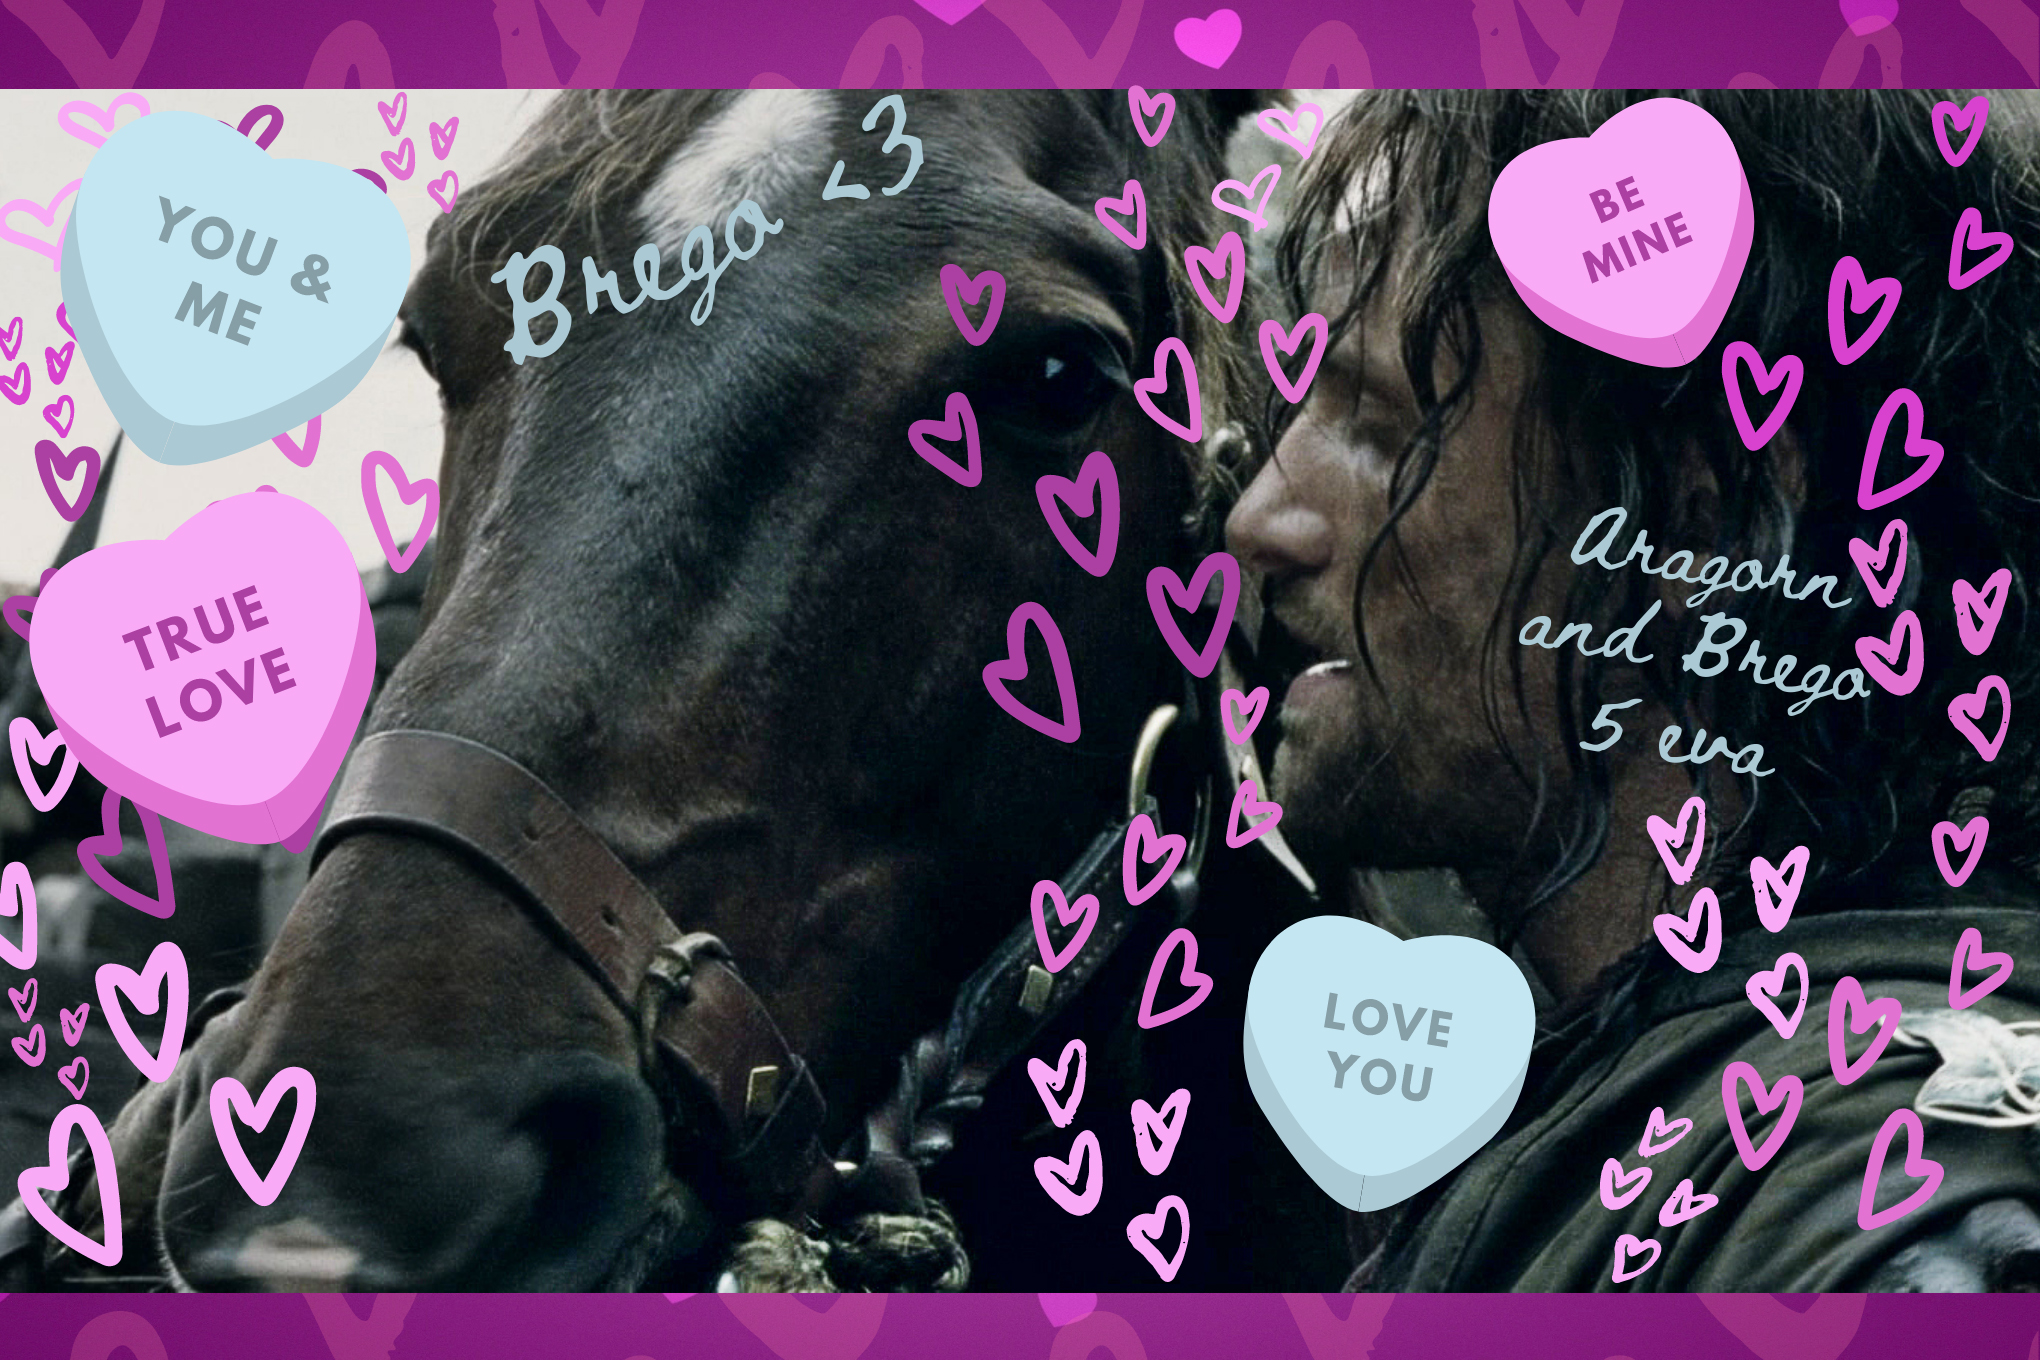 Photo montage of Aragorn from the Lord of the Rings movie with hand drawn hearts and stickers